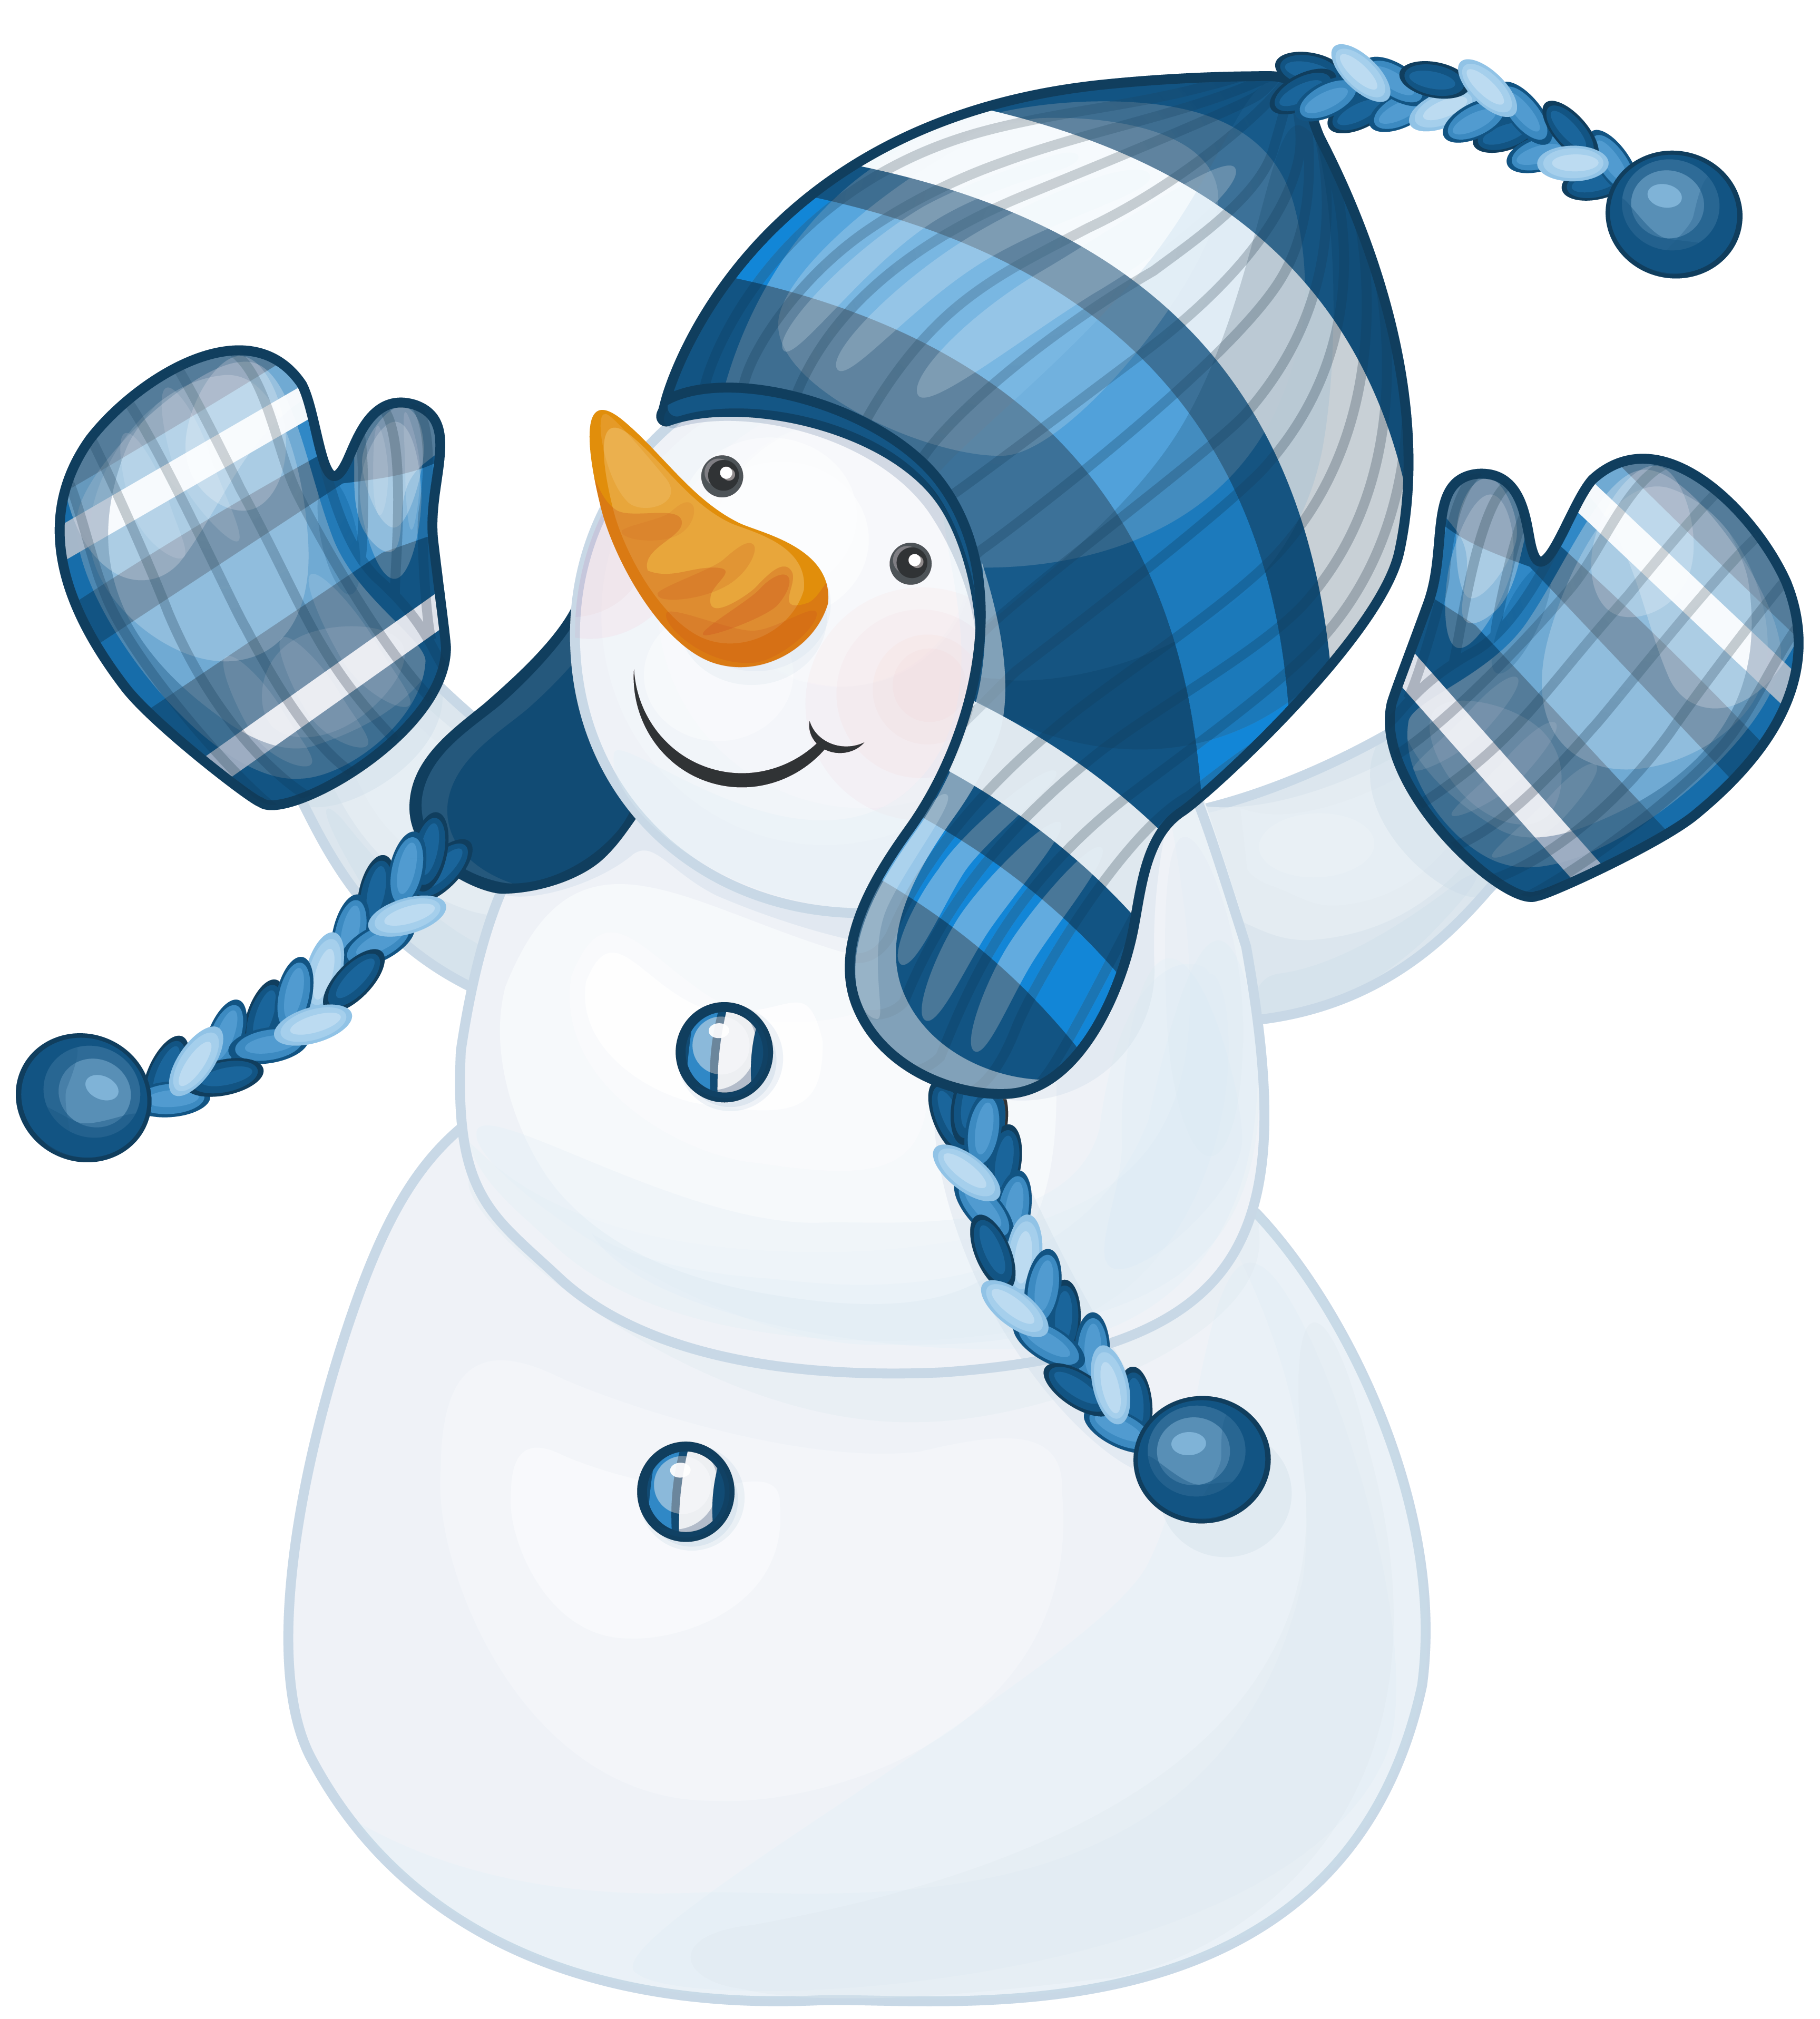 https://gallery.yopriceville.com/var/albums/Free-Clipart-Pictures/Christmas-PNG/Snowman_with_Blue_Hat_Clipart.png?m=1434276848